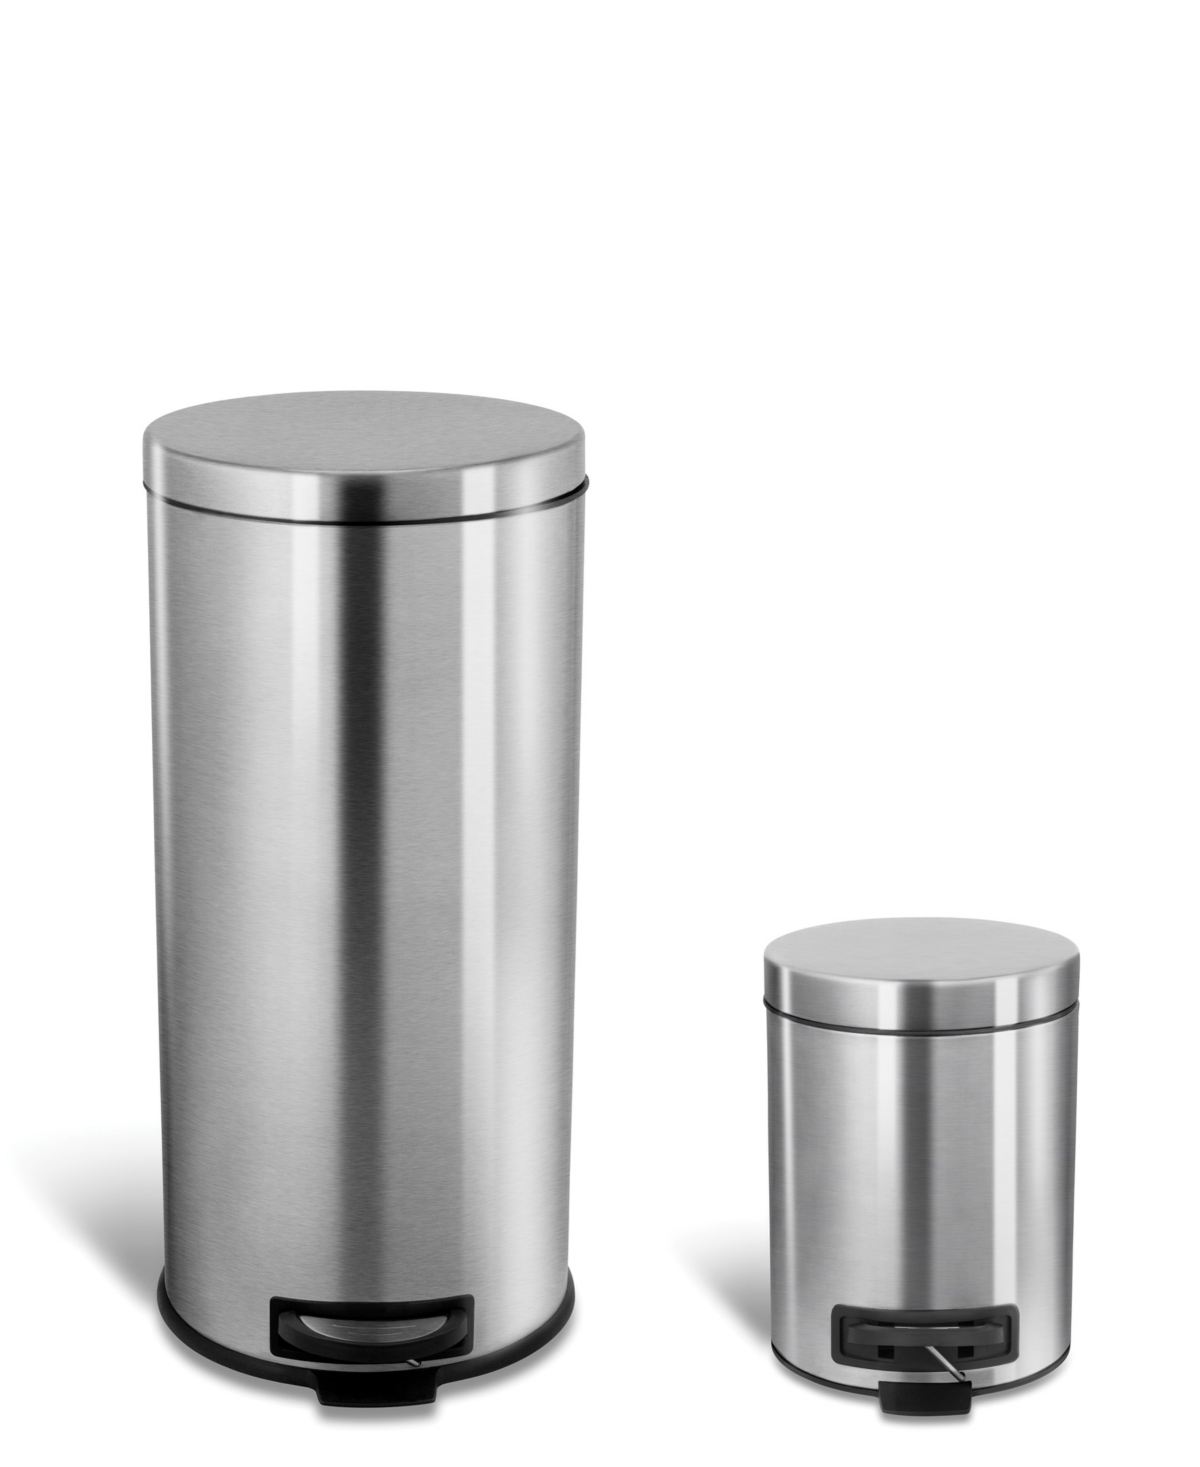 Stainless Steel 8 Gallons 30 Liters and 1.2 Gallons 5 Liters, Step-On Trash Can Combo Set - Silver